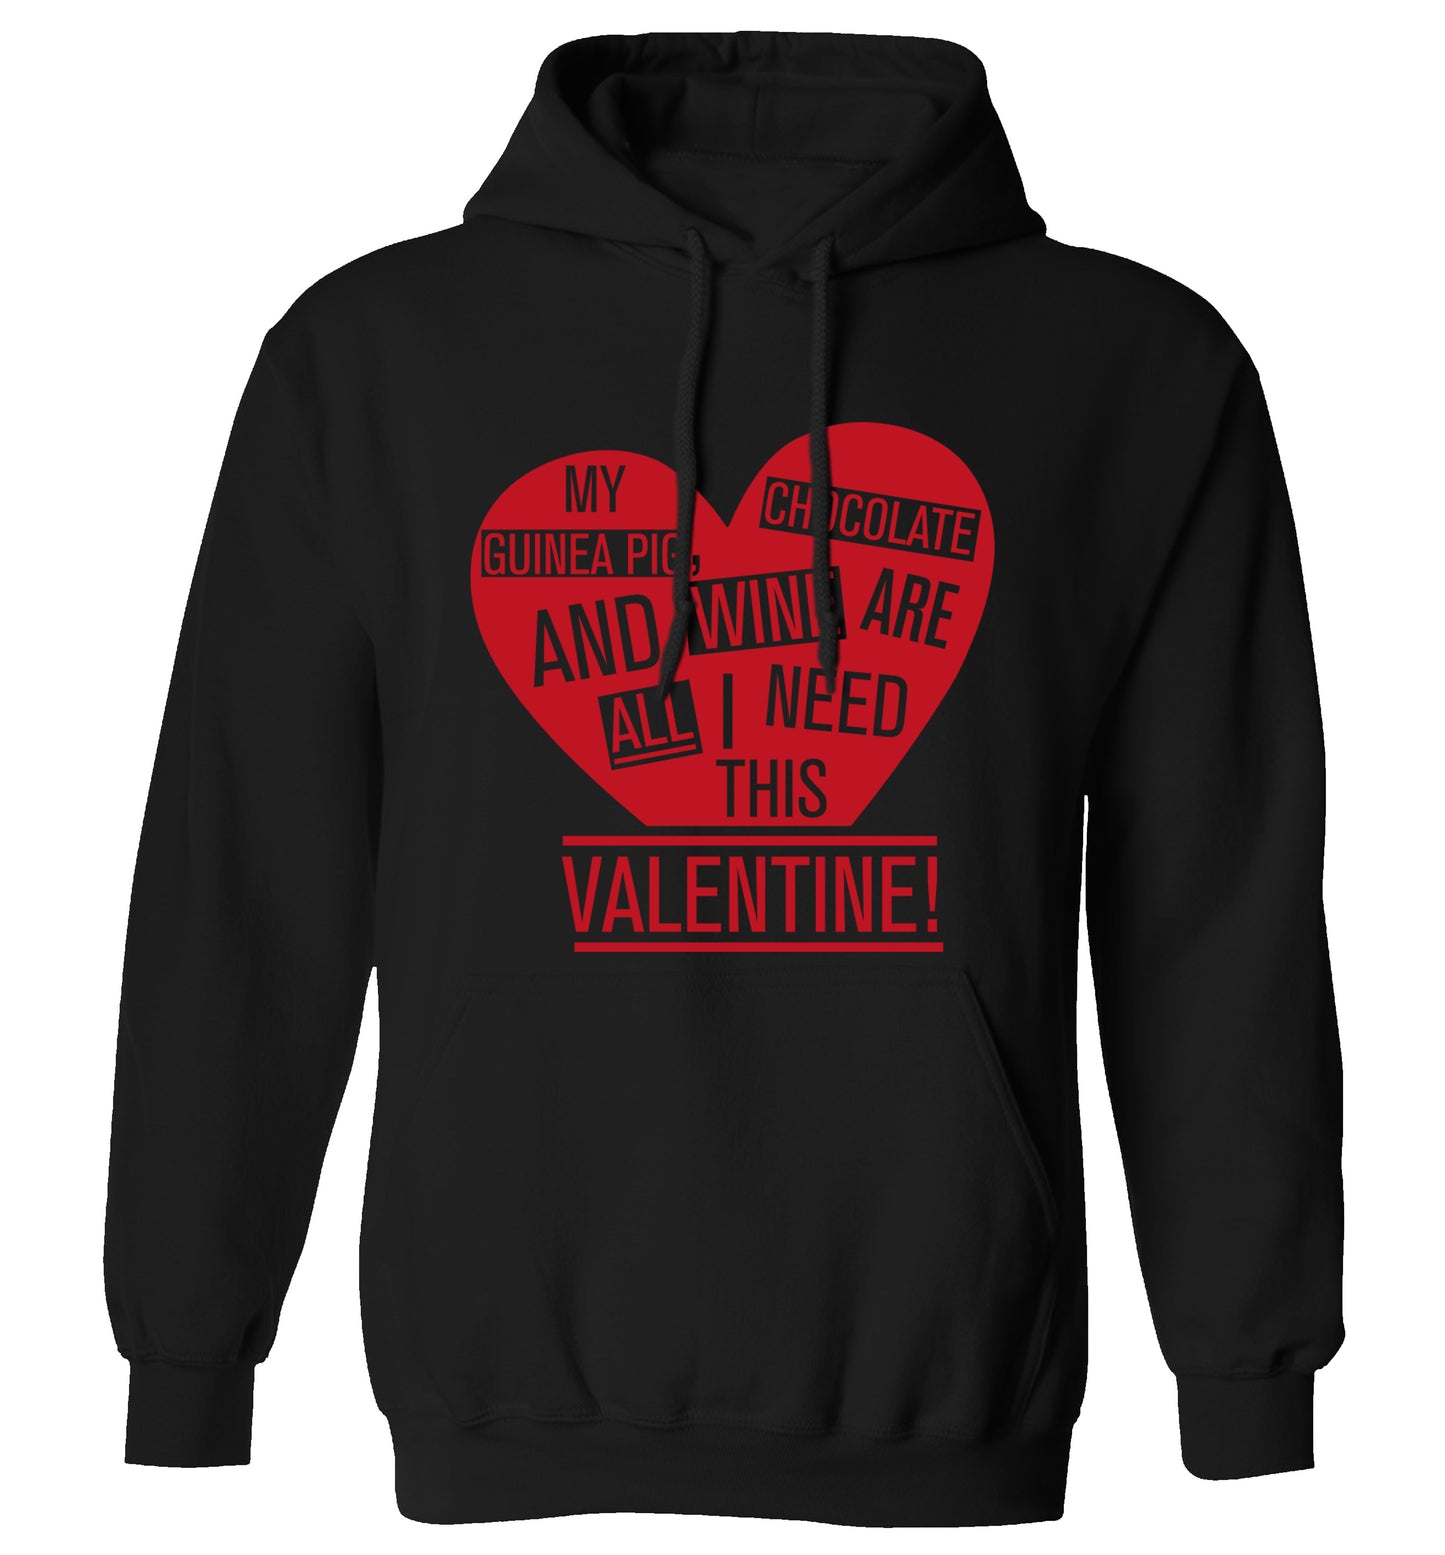 My guinea pig, chocolate and wine are all I need this valentine! adults unisex black hoodie 2XL